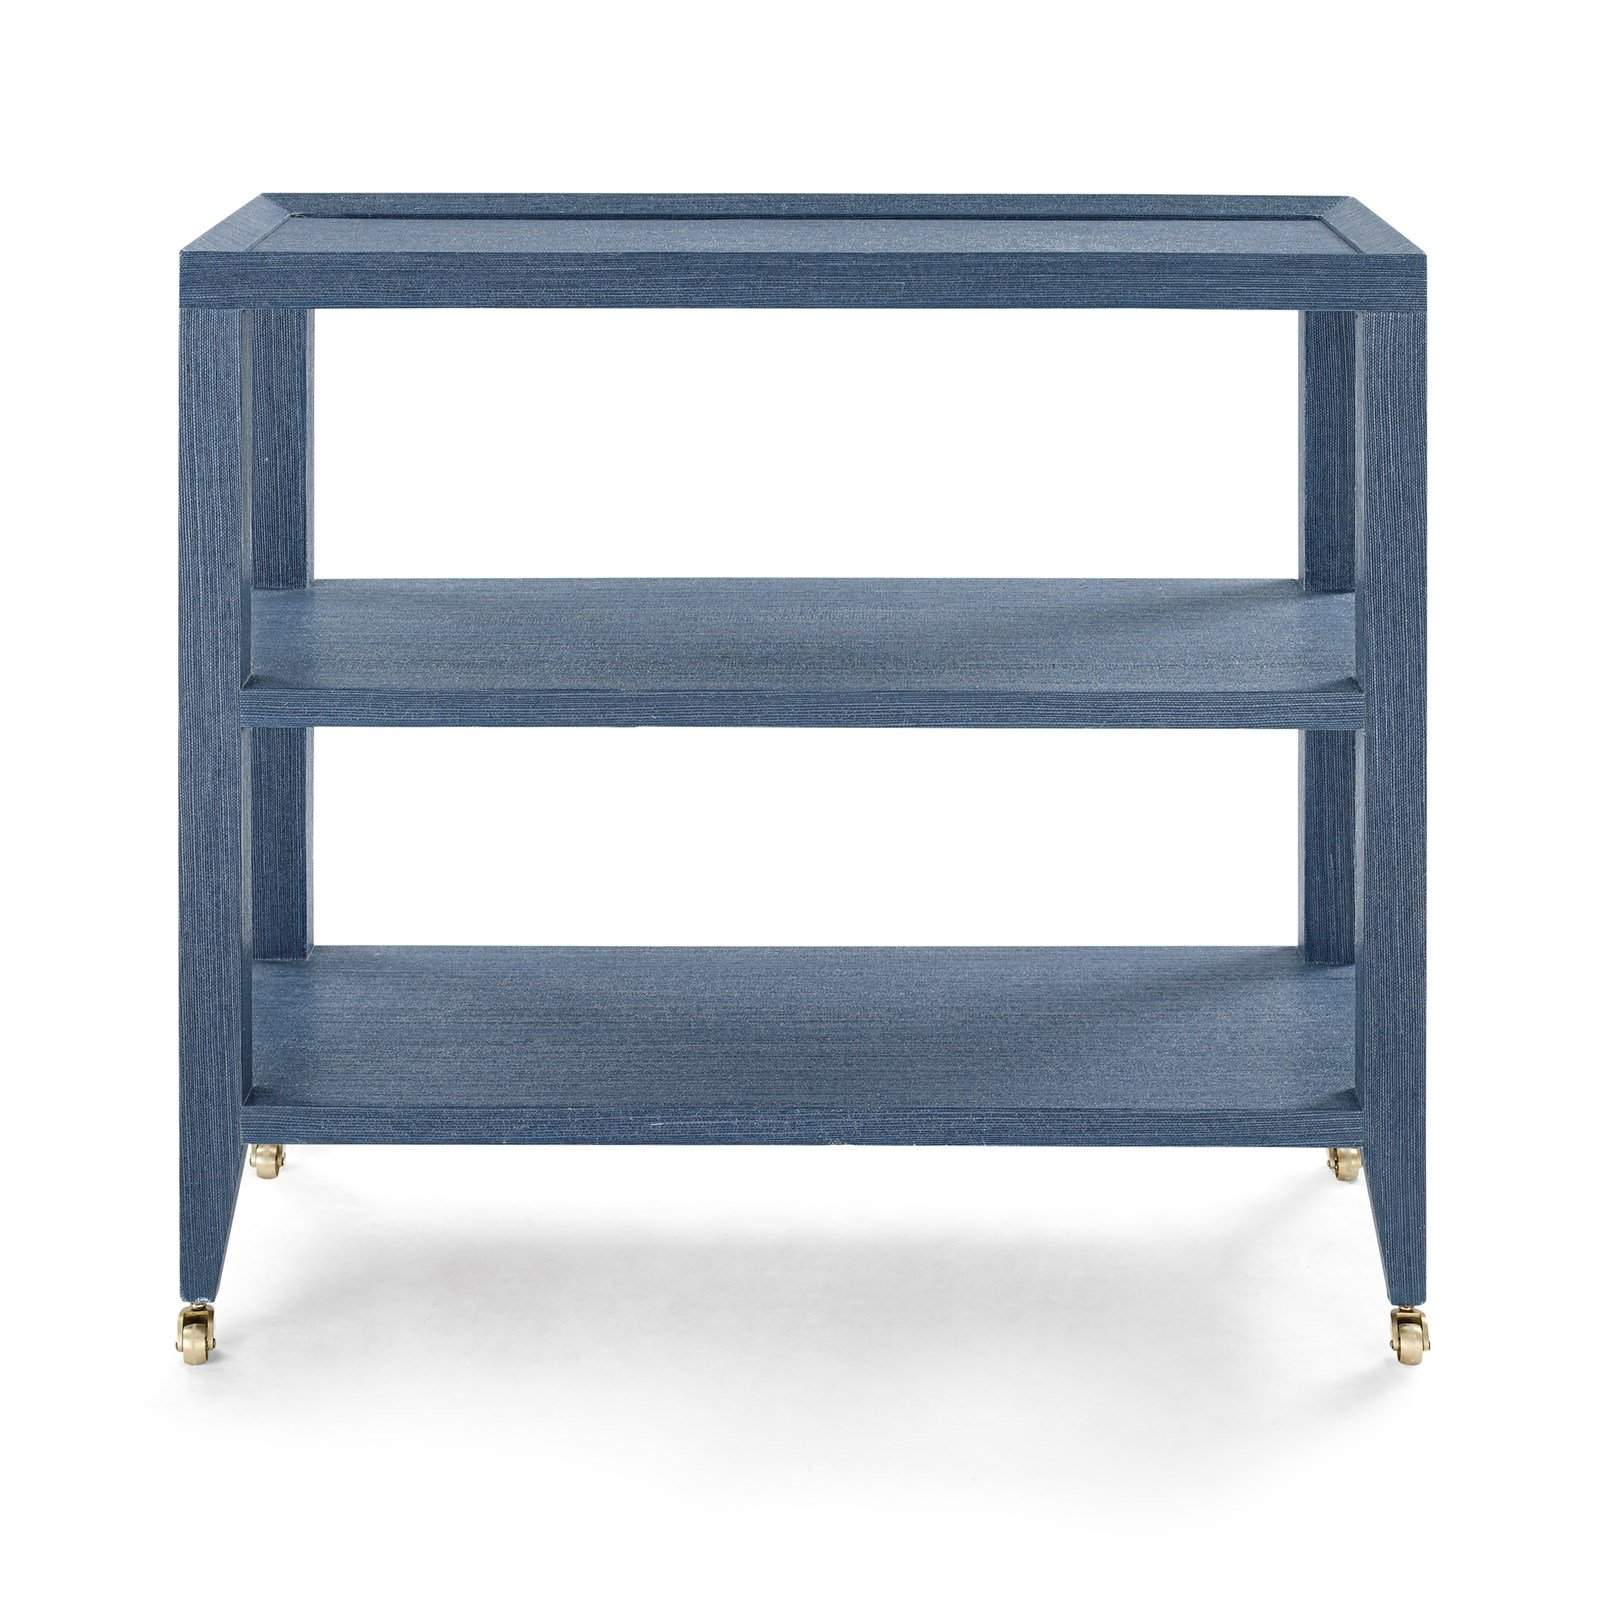 Bungalow 5 - Isadora Console Table In Navy Blue-Bungalow 5-Blue Hand Home